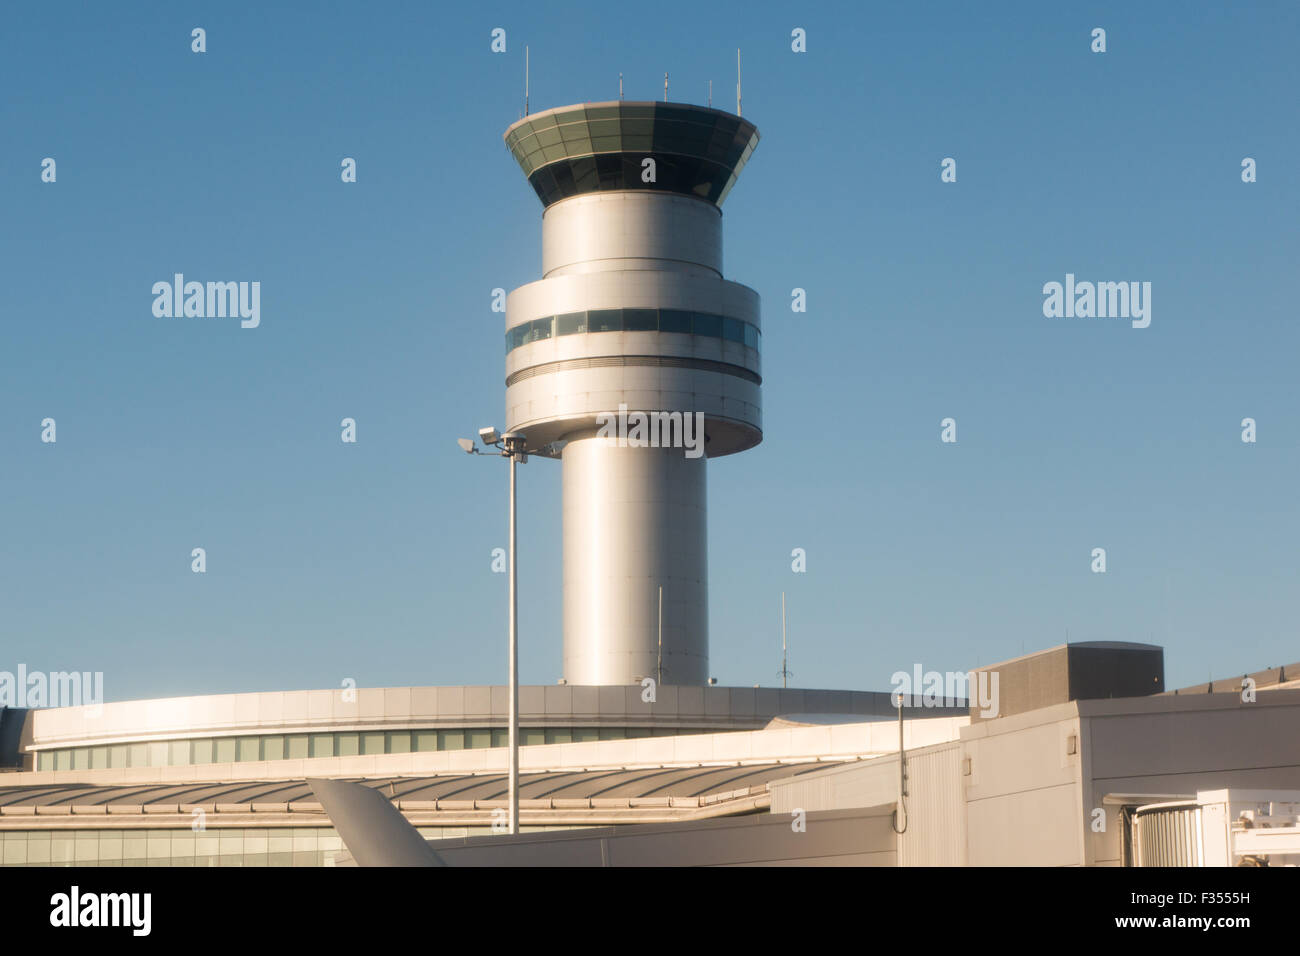 air traffic control tower Stock Photo